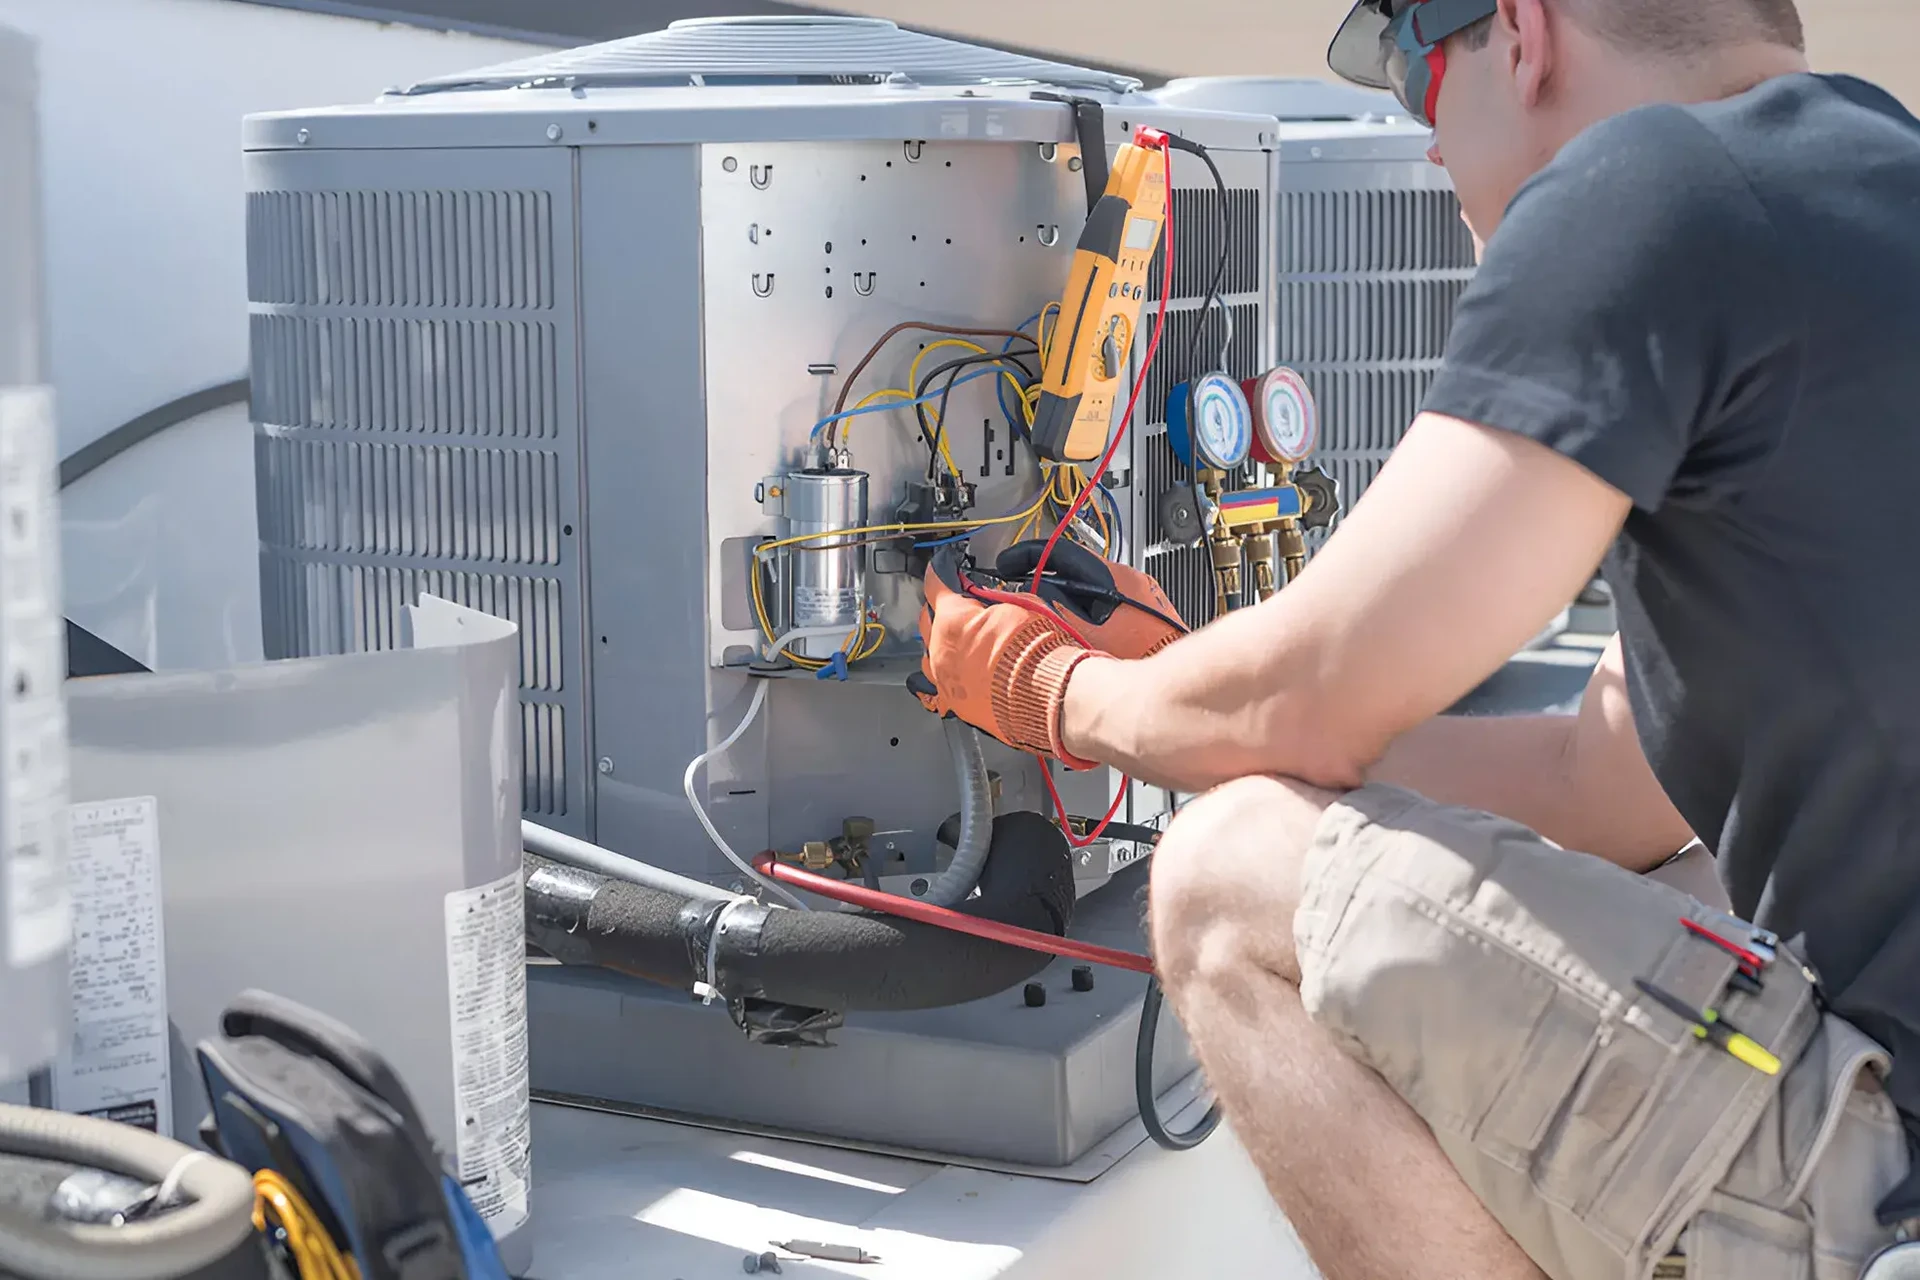 Our refrigeration equipment repair service is designed to provide quick and effective solutions for any issues you may experience with your refrigeration systems. From minor repairs to more complex problems, our team of technicians is equipped to address a wide range of issues and restore your equipment to optimal functioning in no time.